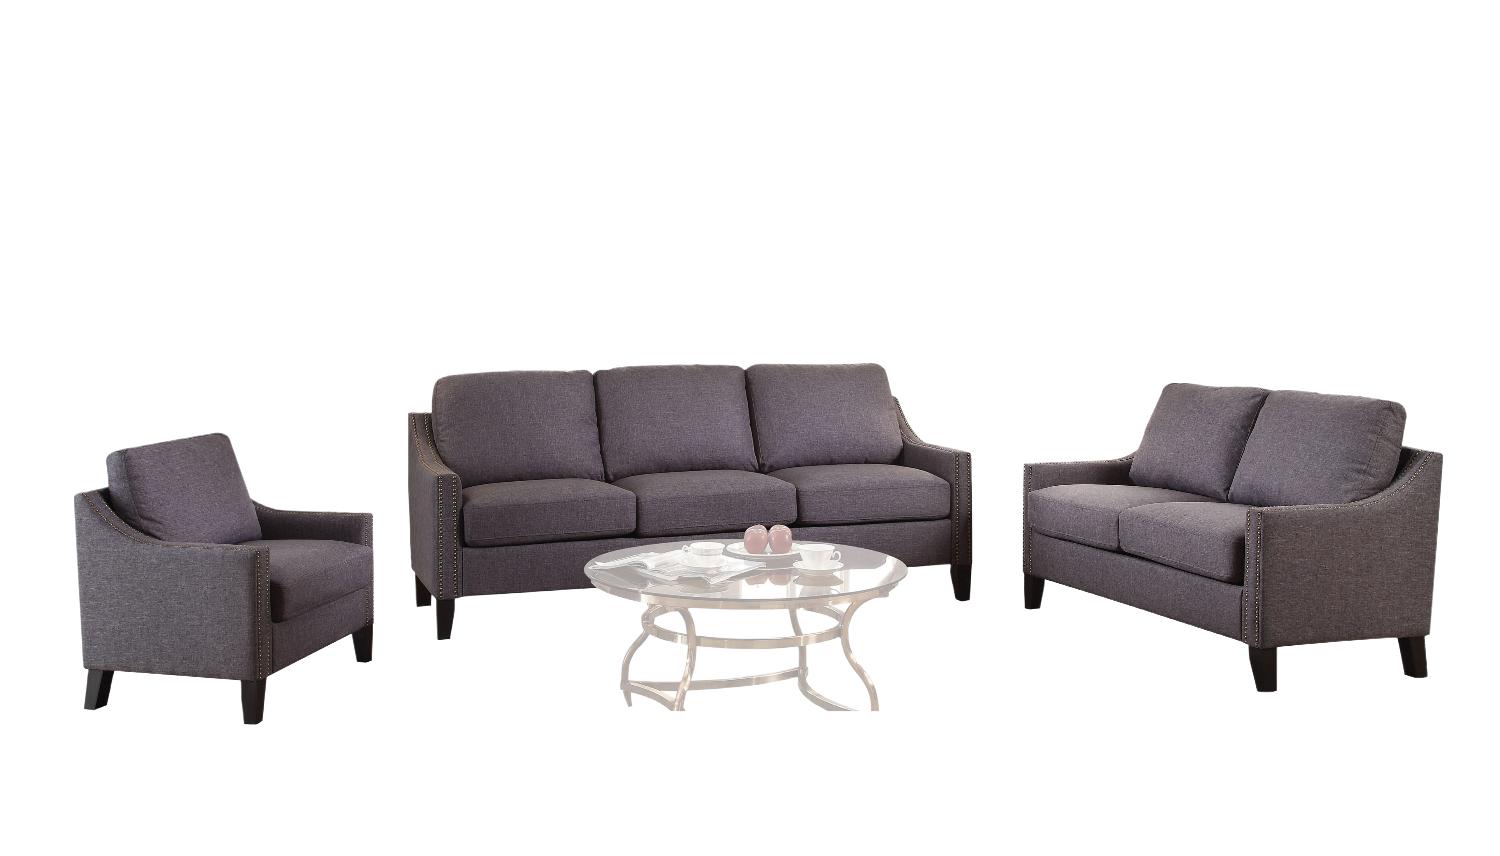 Contemporary Sofa Loveseat and Chair Set Zapata 53755-3pcs in Gray Linen